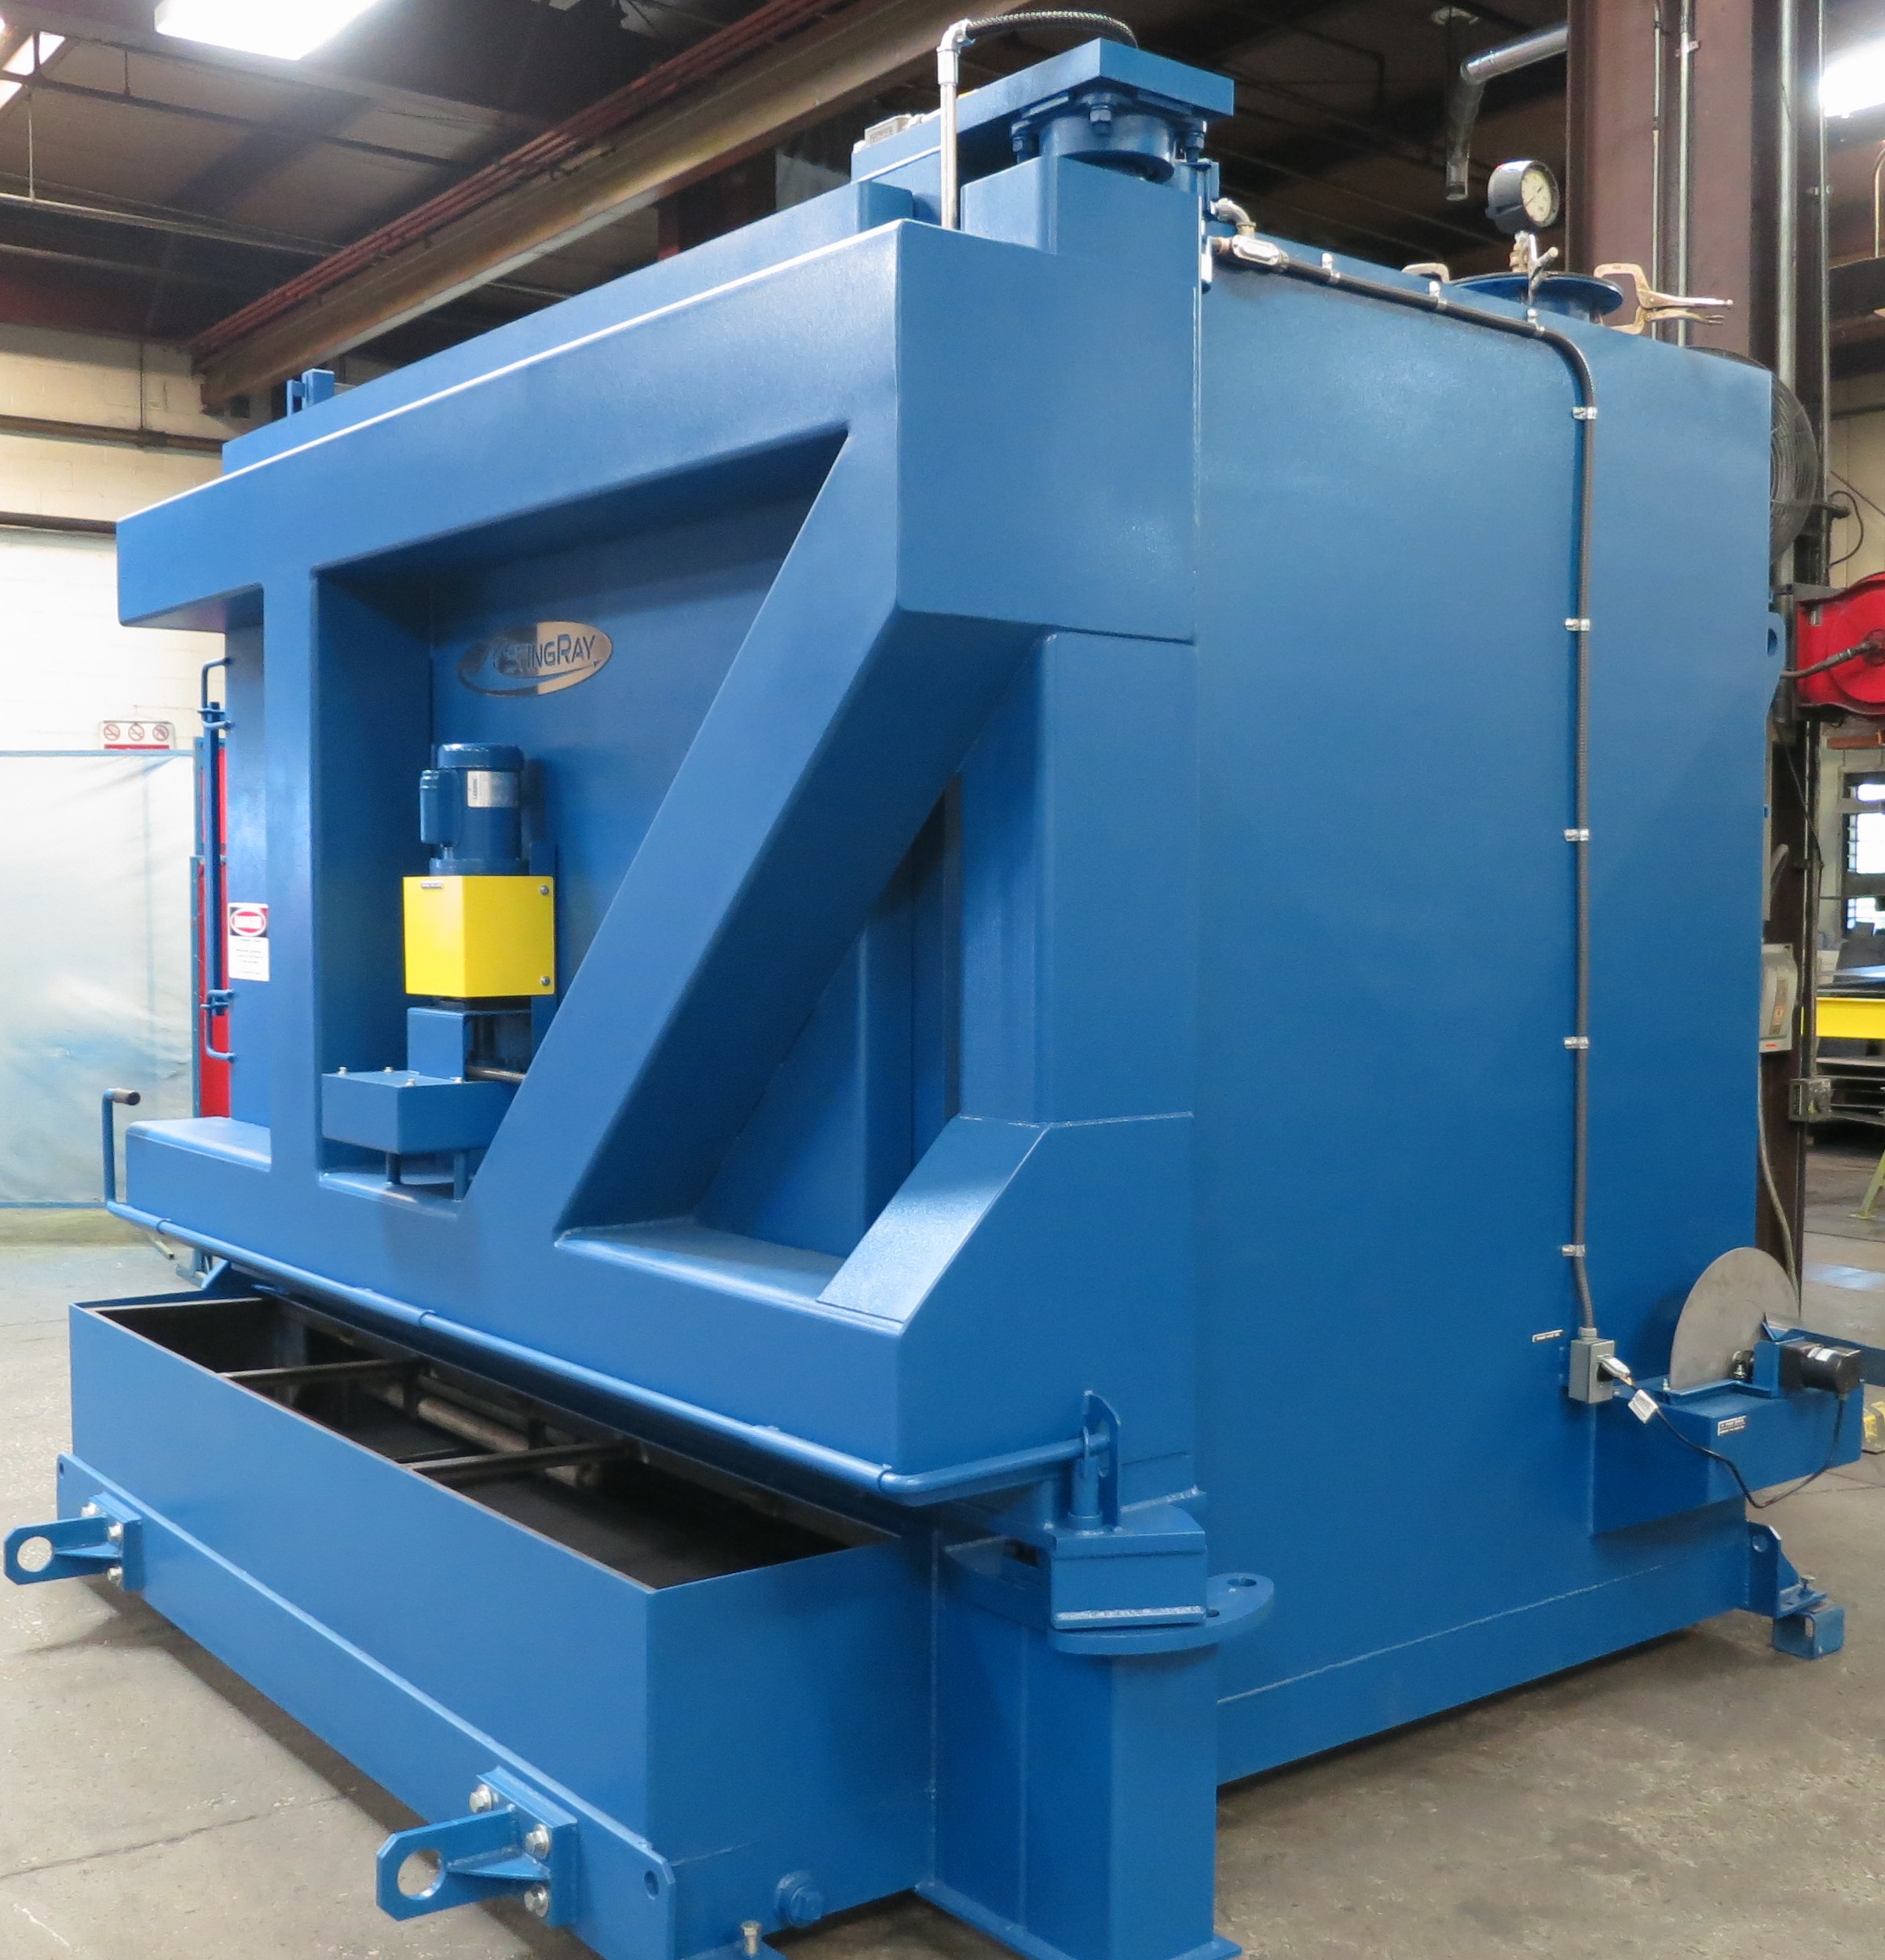 Industrial Parts Washer by StingRay for Oil Well Drilling Components